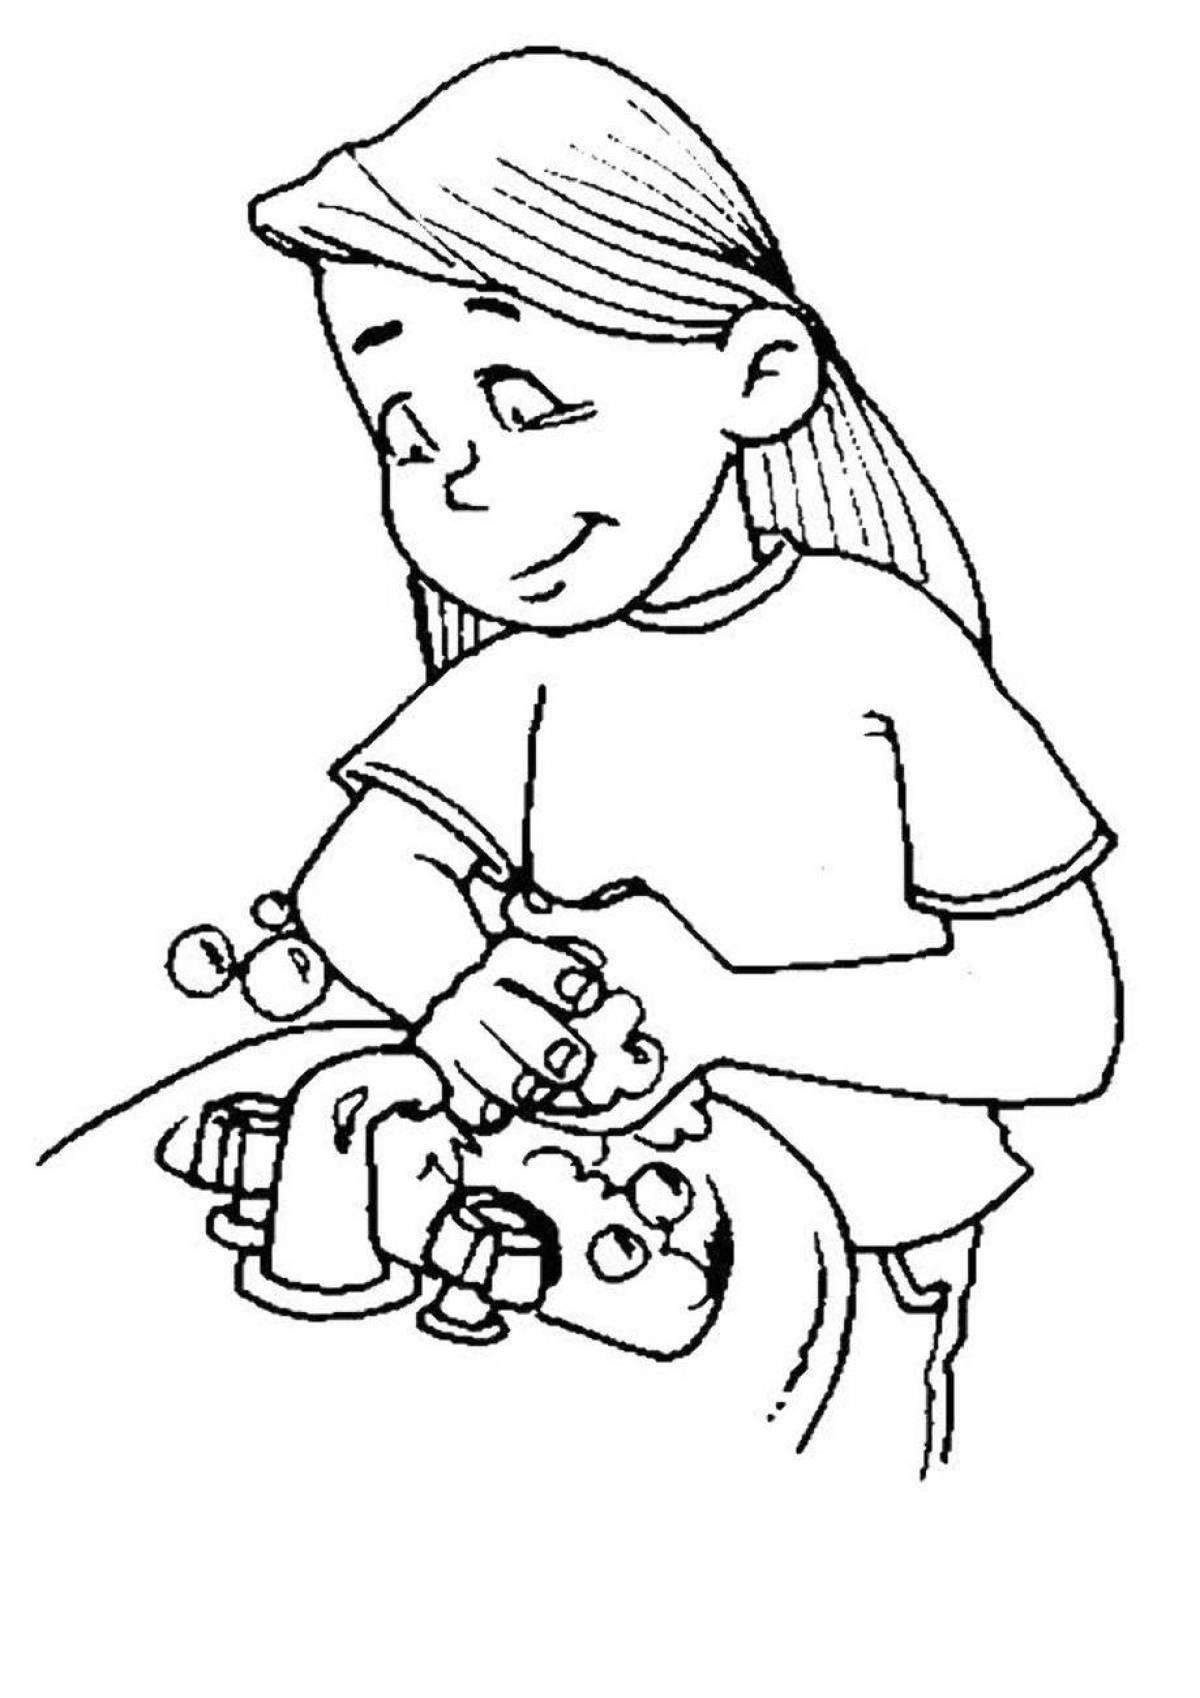 Hand washing coloring page